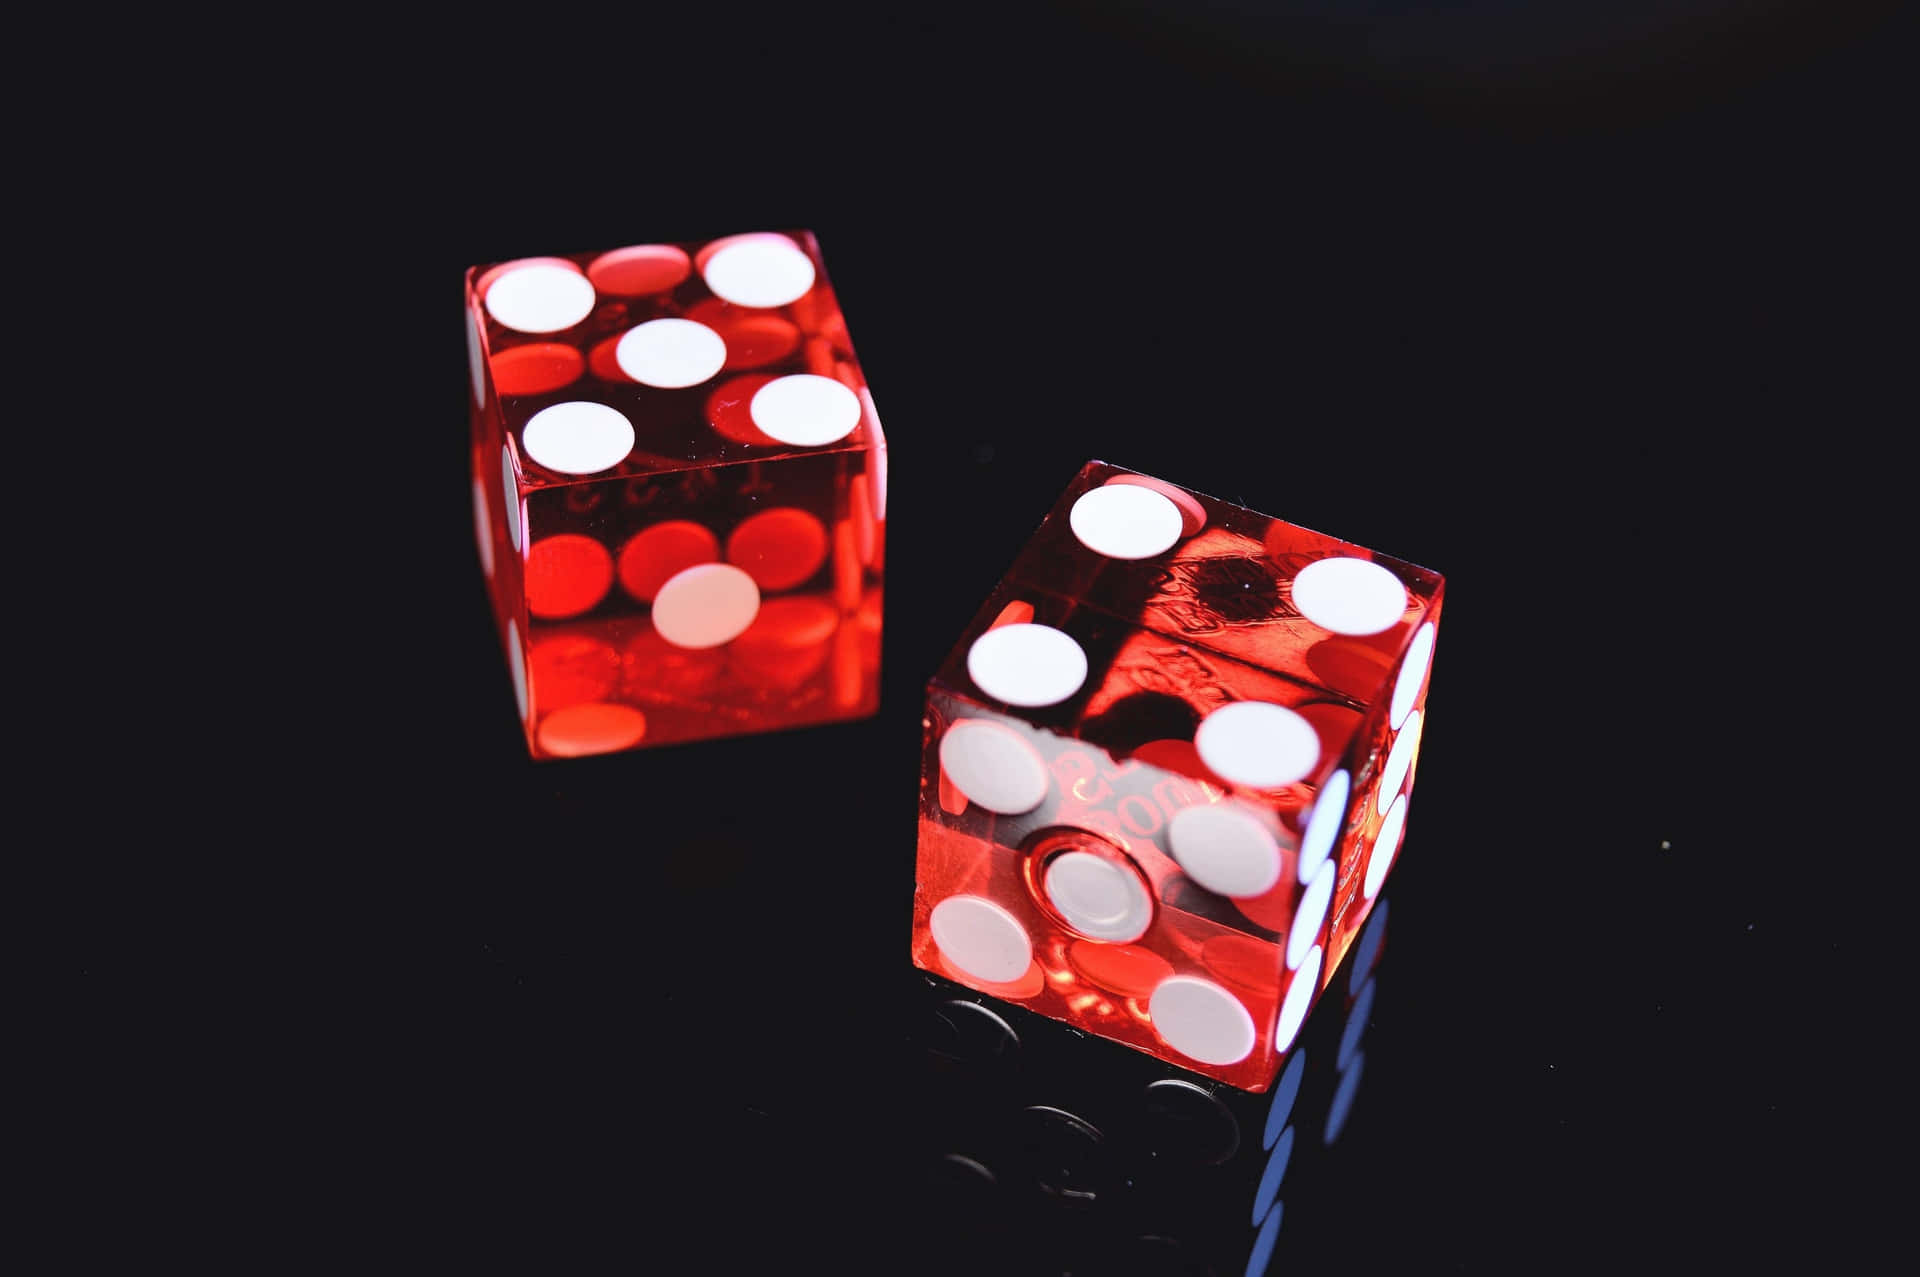 Two Red Dice On A Black Surface